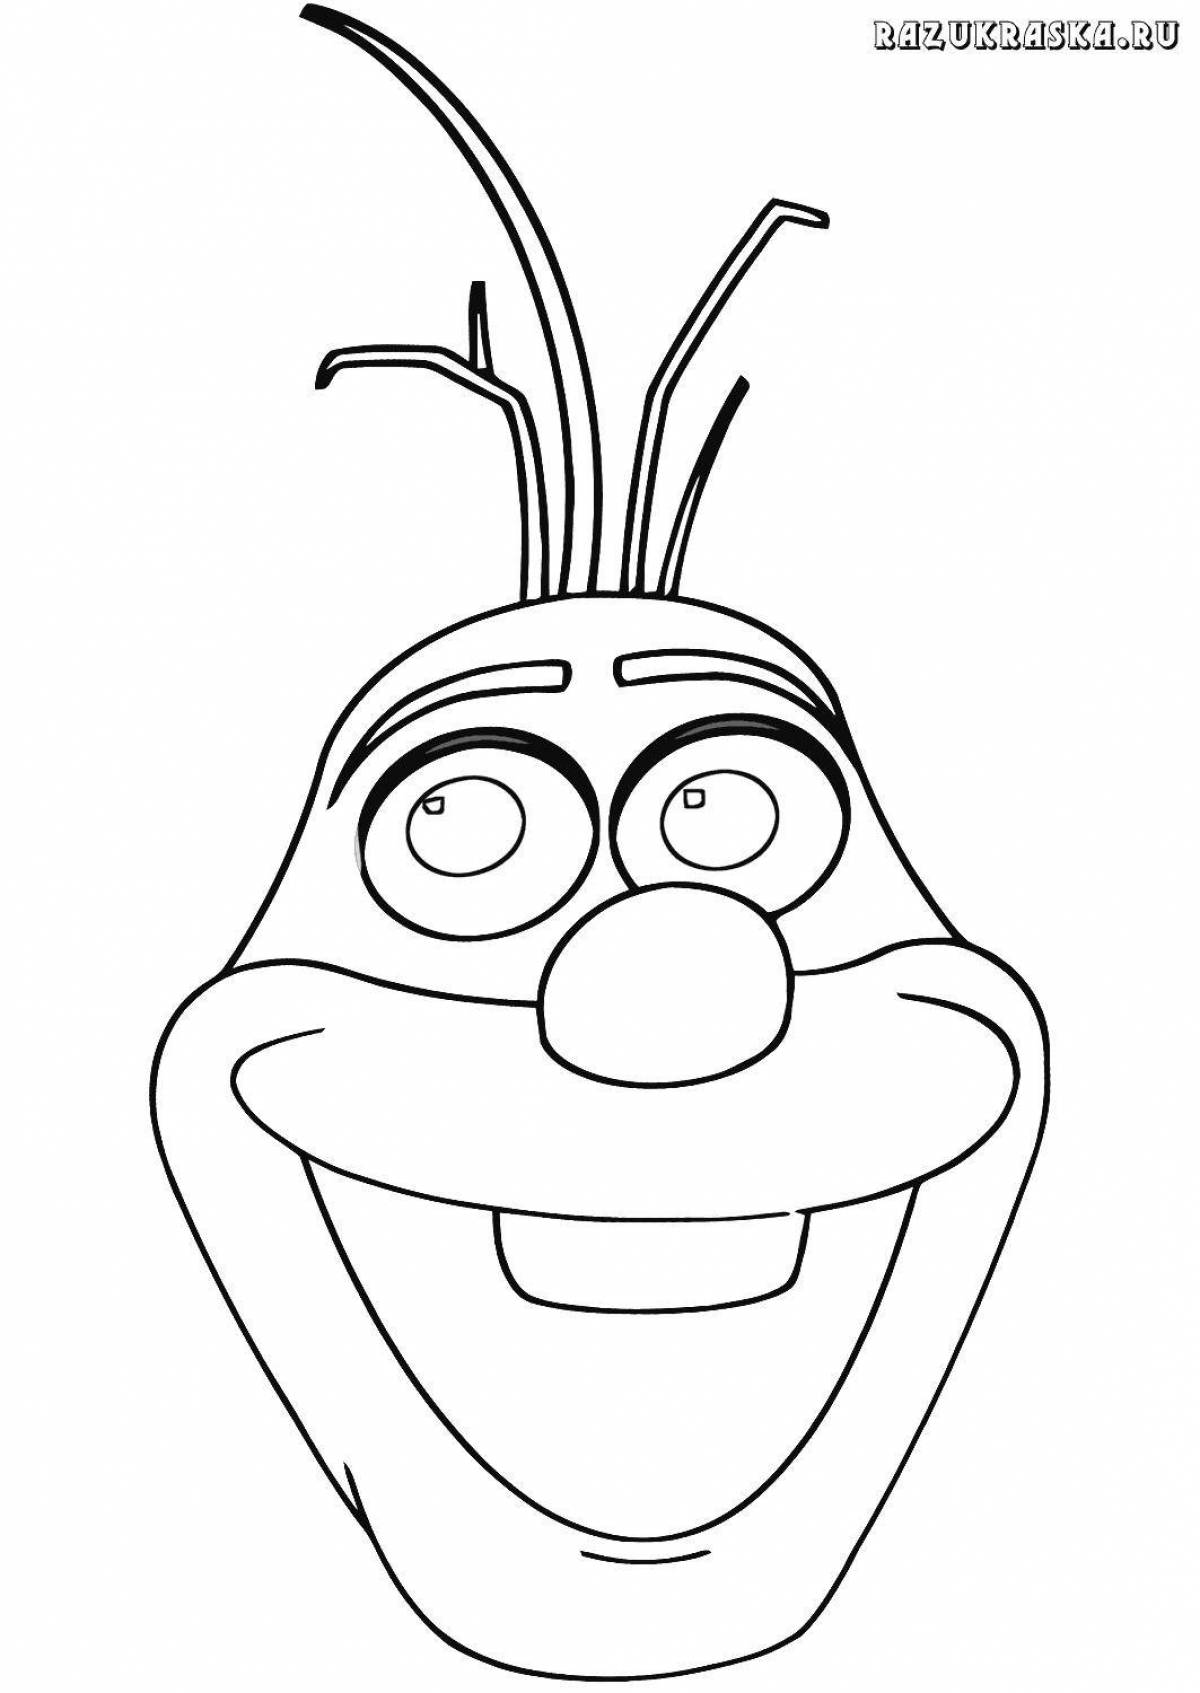 Fancy snowman mask coloring page